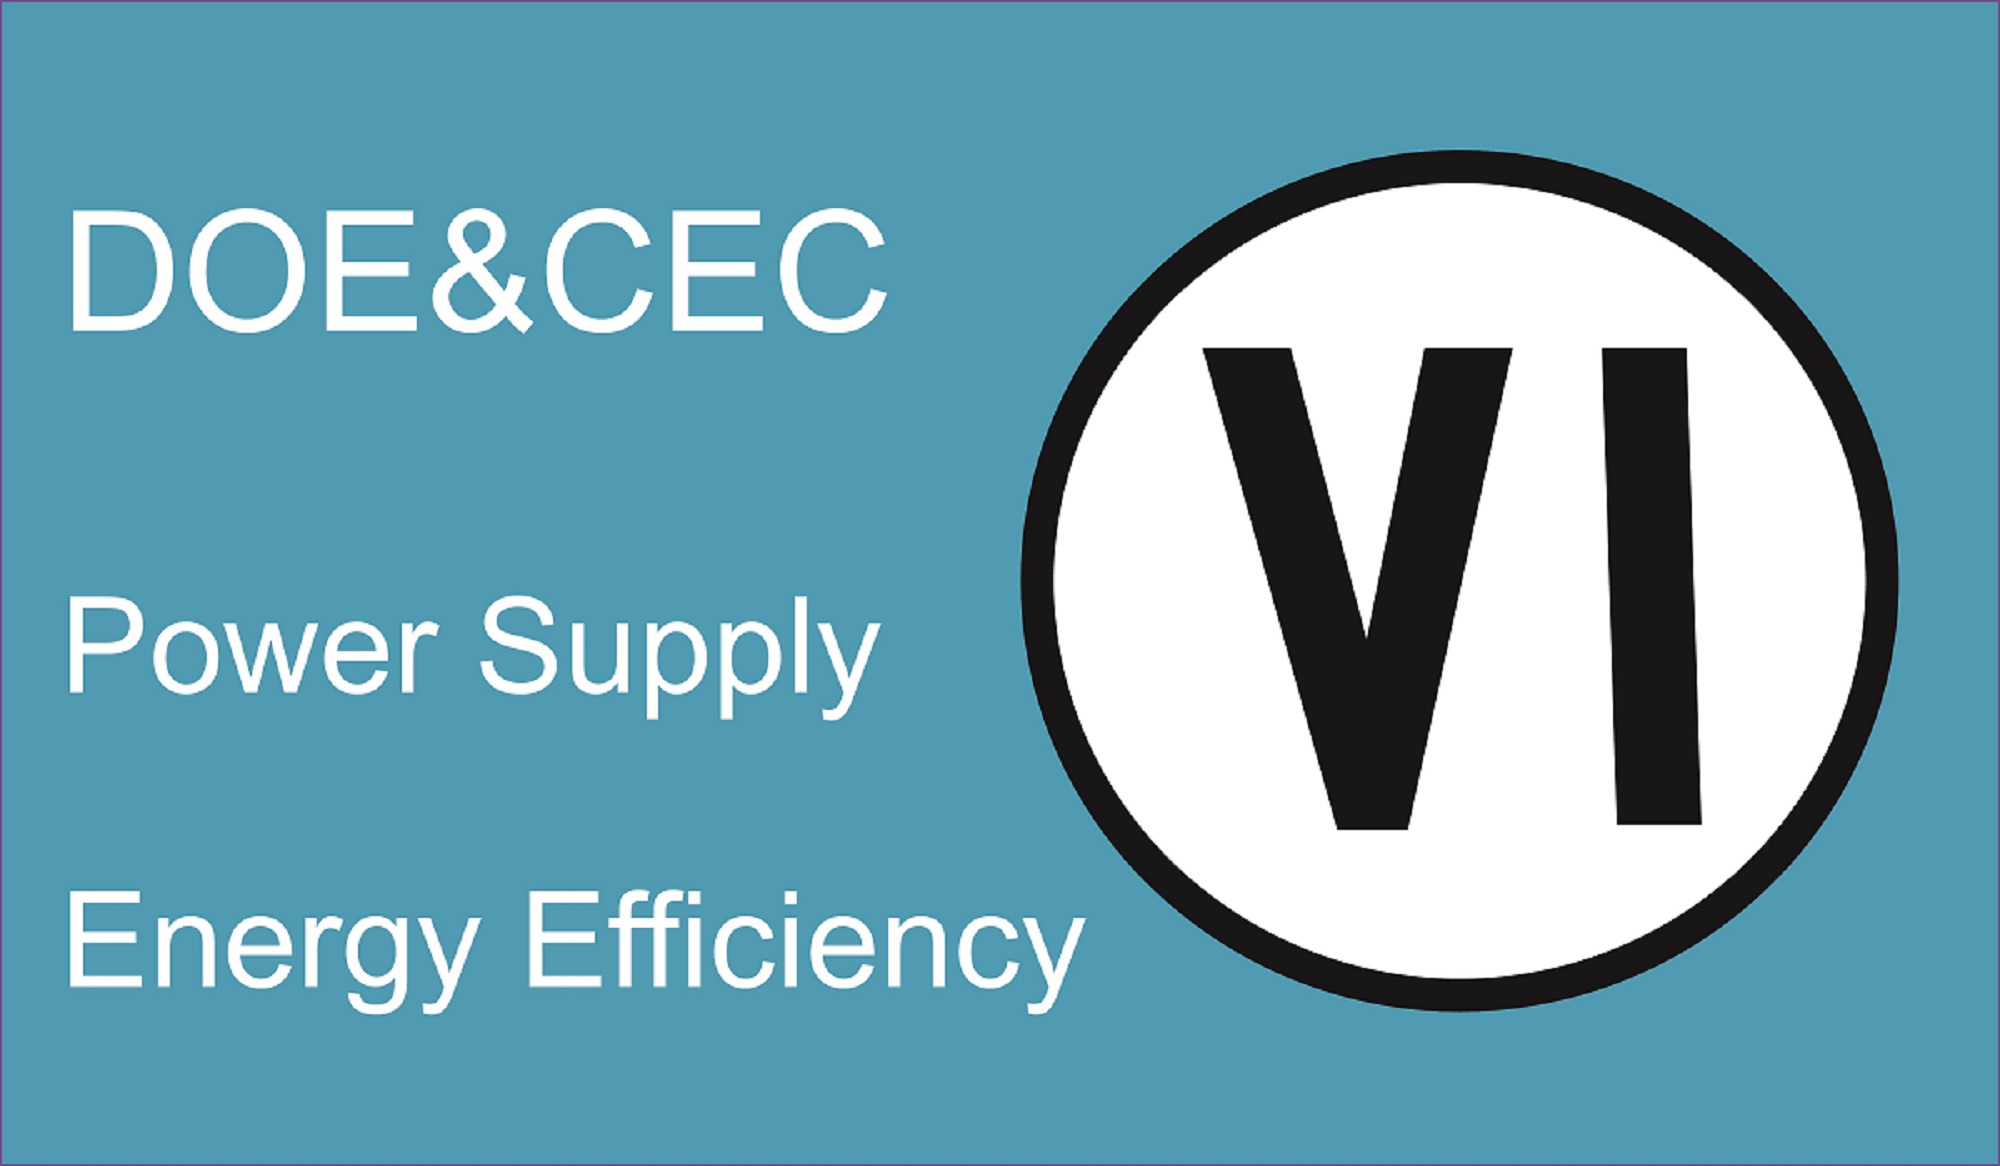 The newest Energy Efficiency level VI requirement in USA